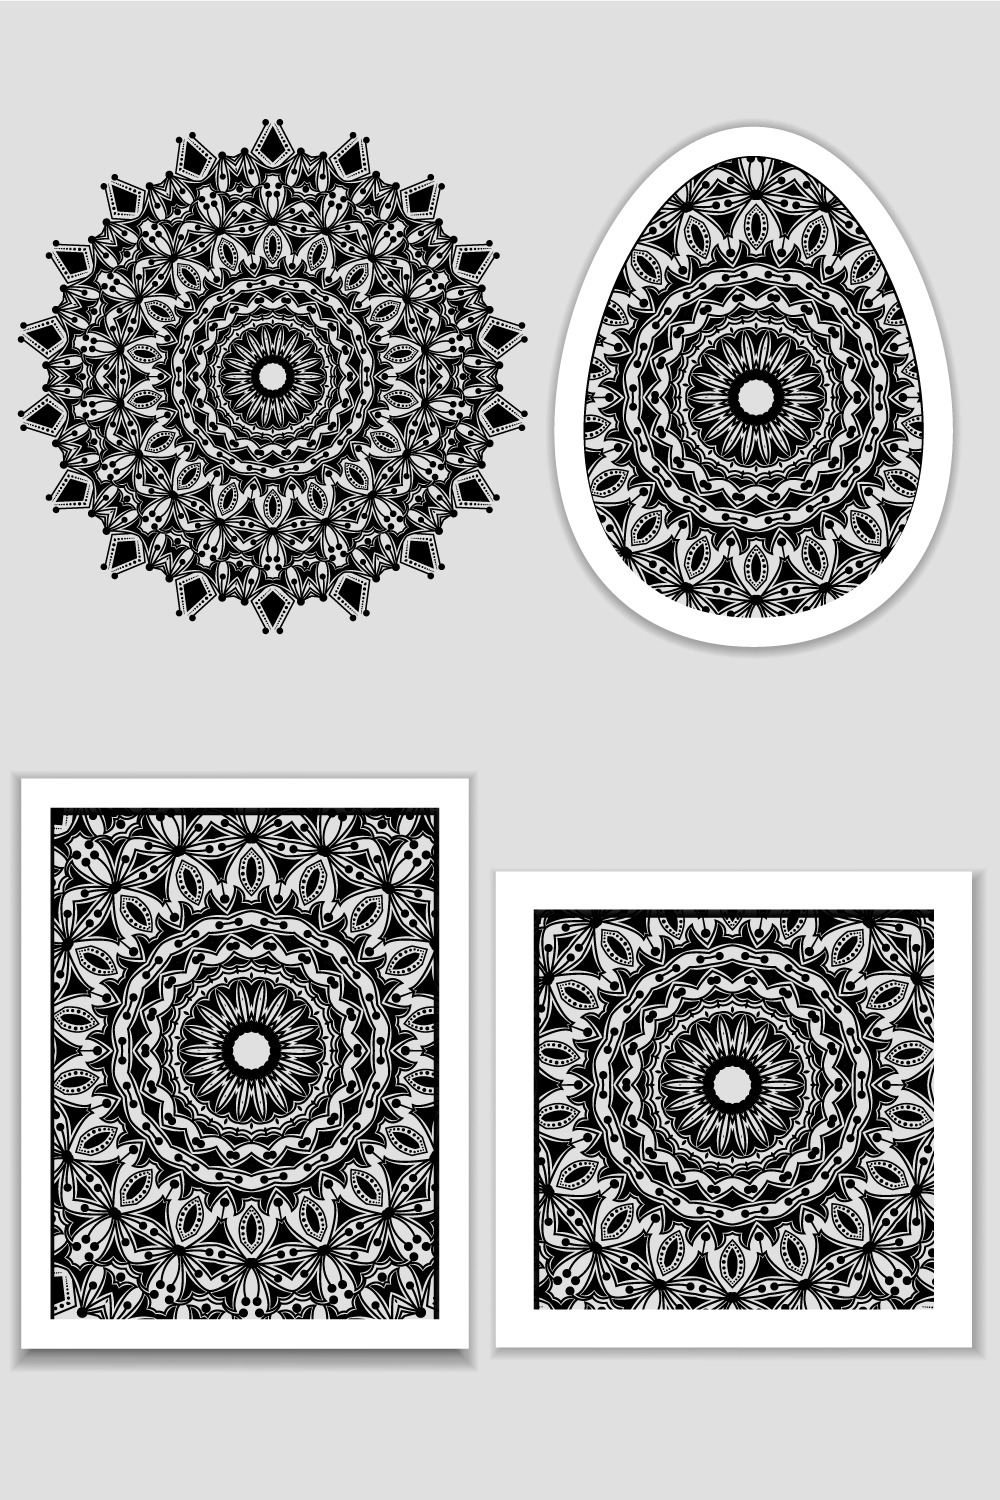 Golden Vector Mandala Isolated On White Background. A Symbol Of Life And Health - Pinterest.